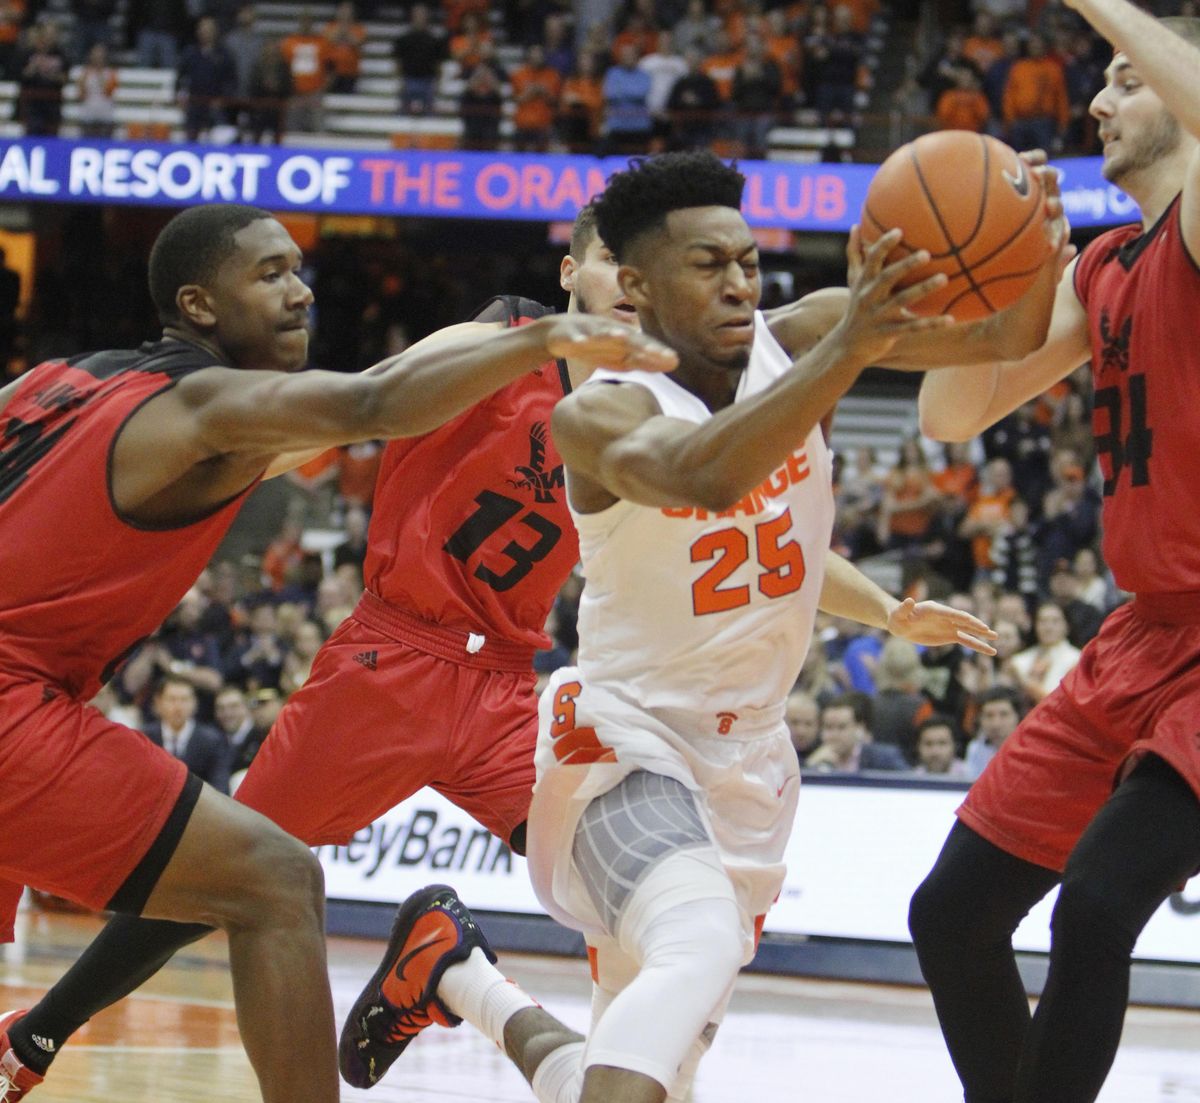 Syracuse’s Tyus Battle, center, drives to the hoop past Eastern Washington’s Kim Aiken, left, Luka Vulikic, back, and Jesse Hunt, right, in the first half  Tuesday in Syracuse, N.Y. (Nick Lisi / AP)